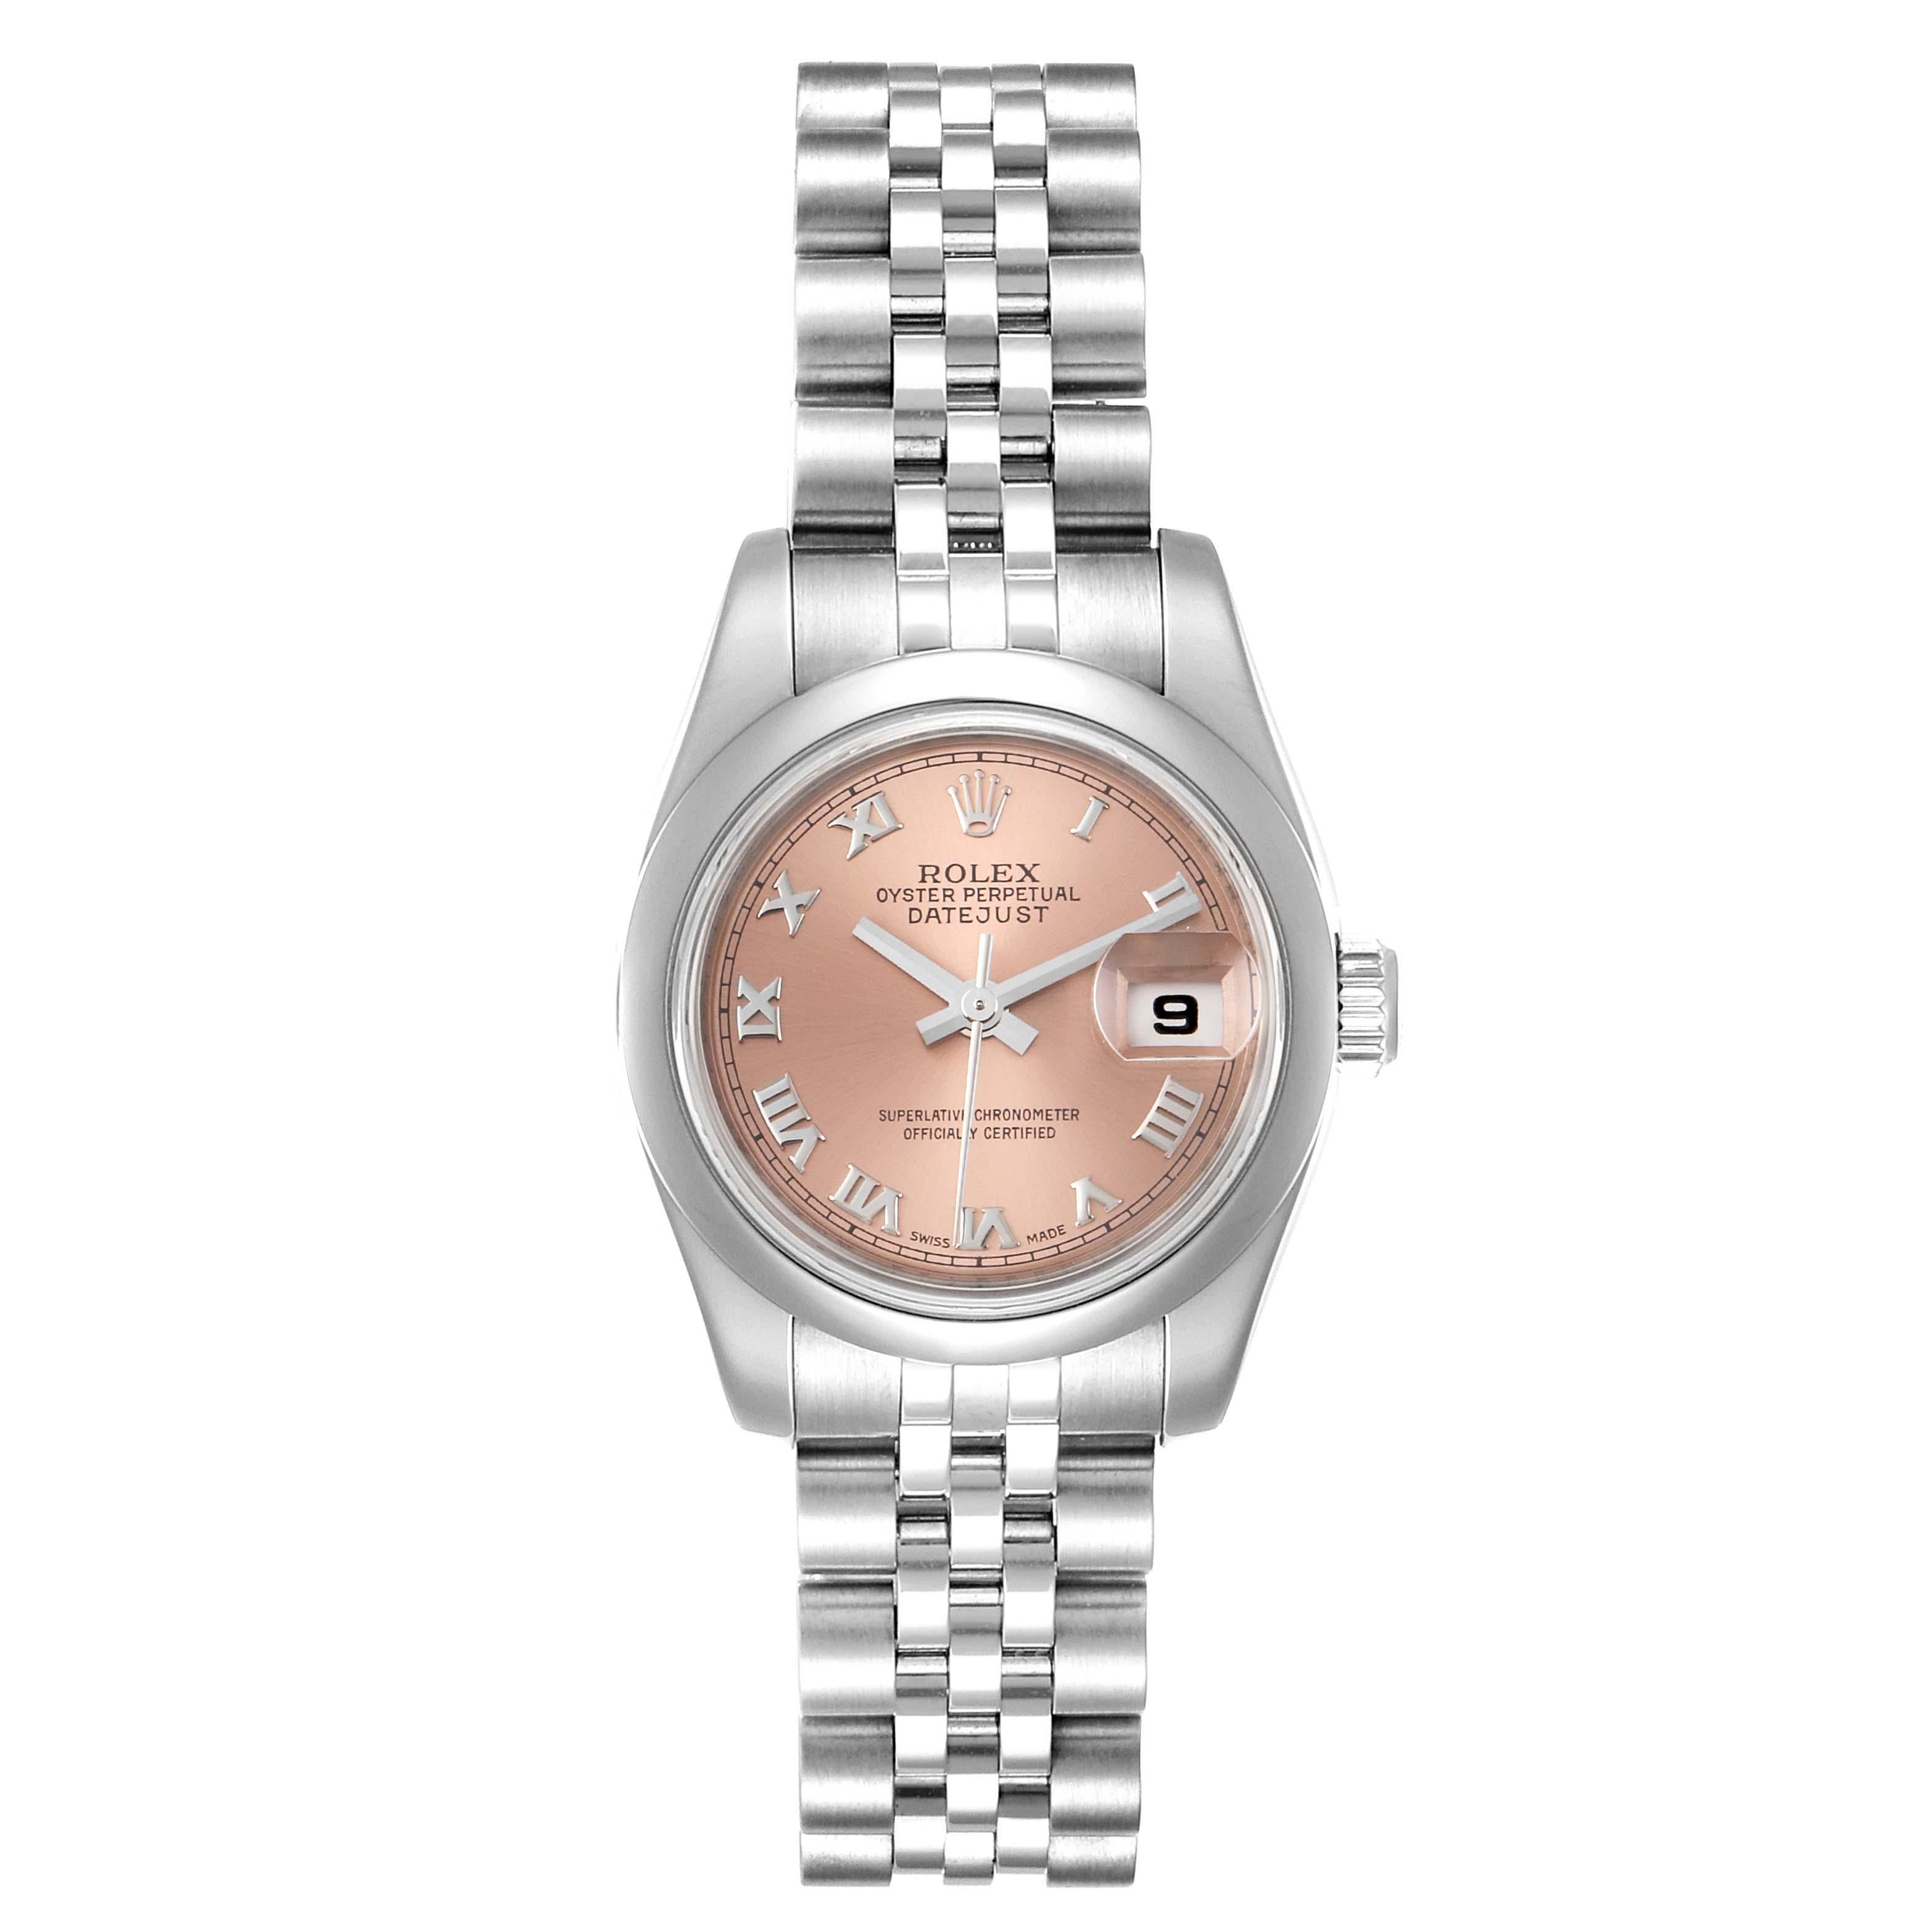 Rolex Datejust Salmon Roman Dial Steel Ladies Watch 179160. Officially certified chronometer self-winding movement with quickset date function. Stainless steel oyster case 26.0 mm in diameter. Rolex logo on a crown. Stainless steel smooth bezel.